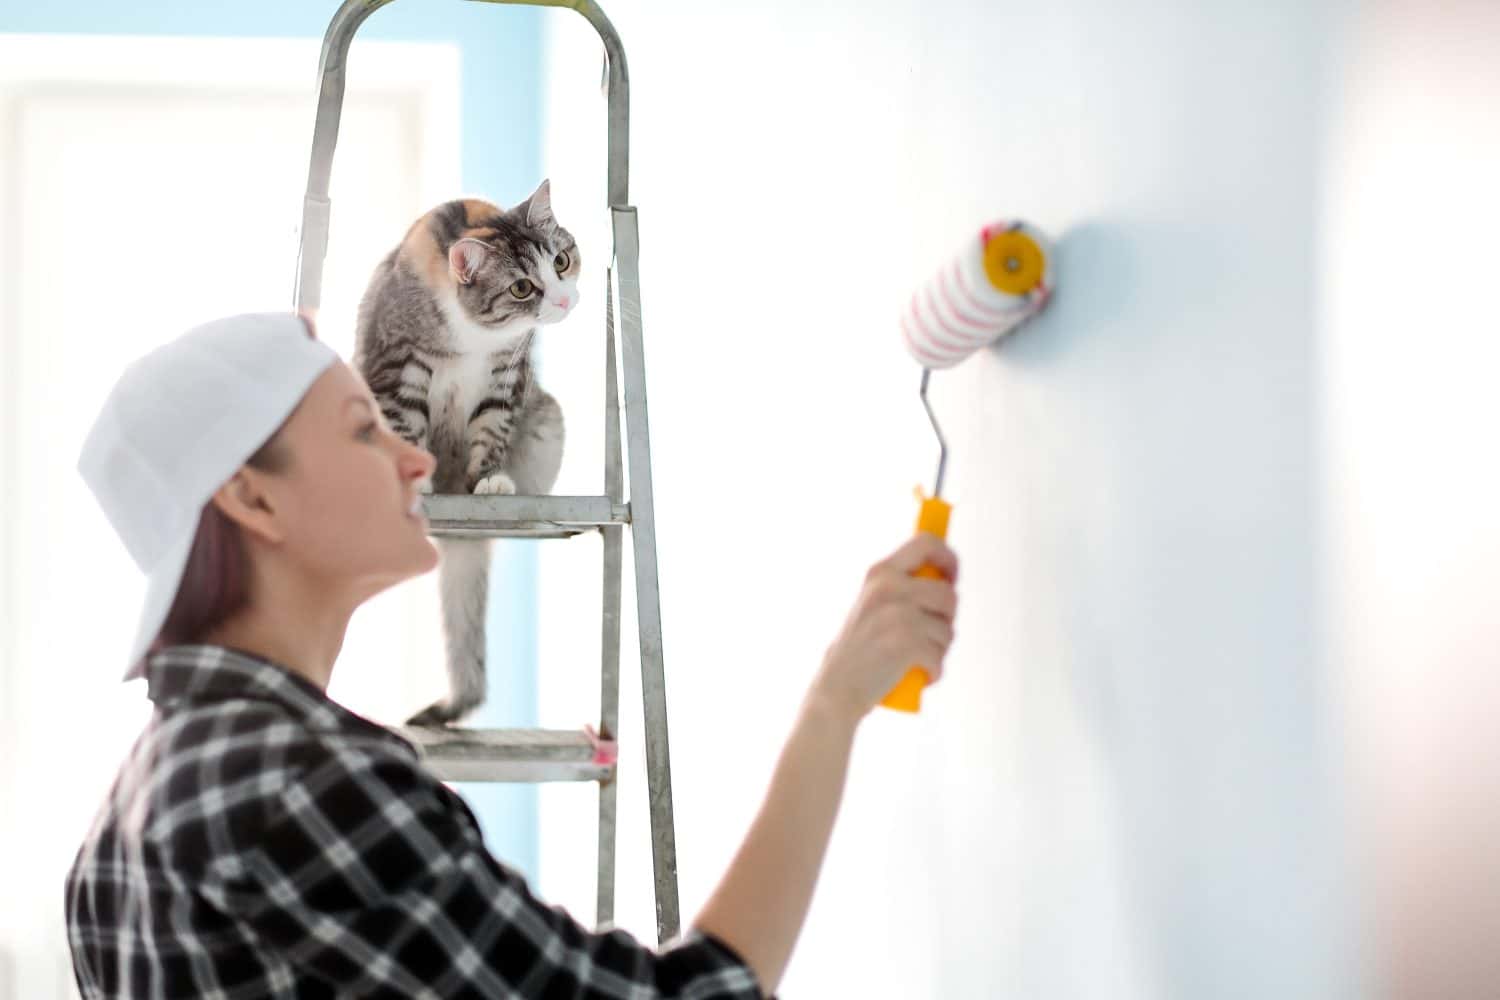 Girl painter, designer and worker paints a roller and brush the wall. The cat sits next to the ladder and looks at the work.